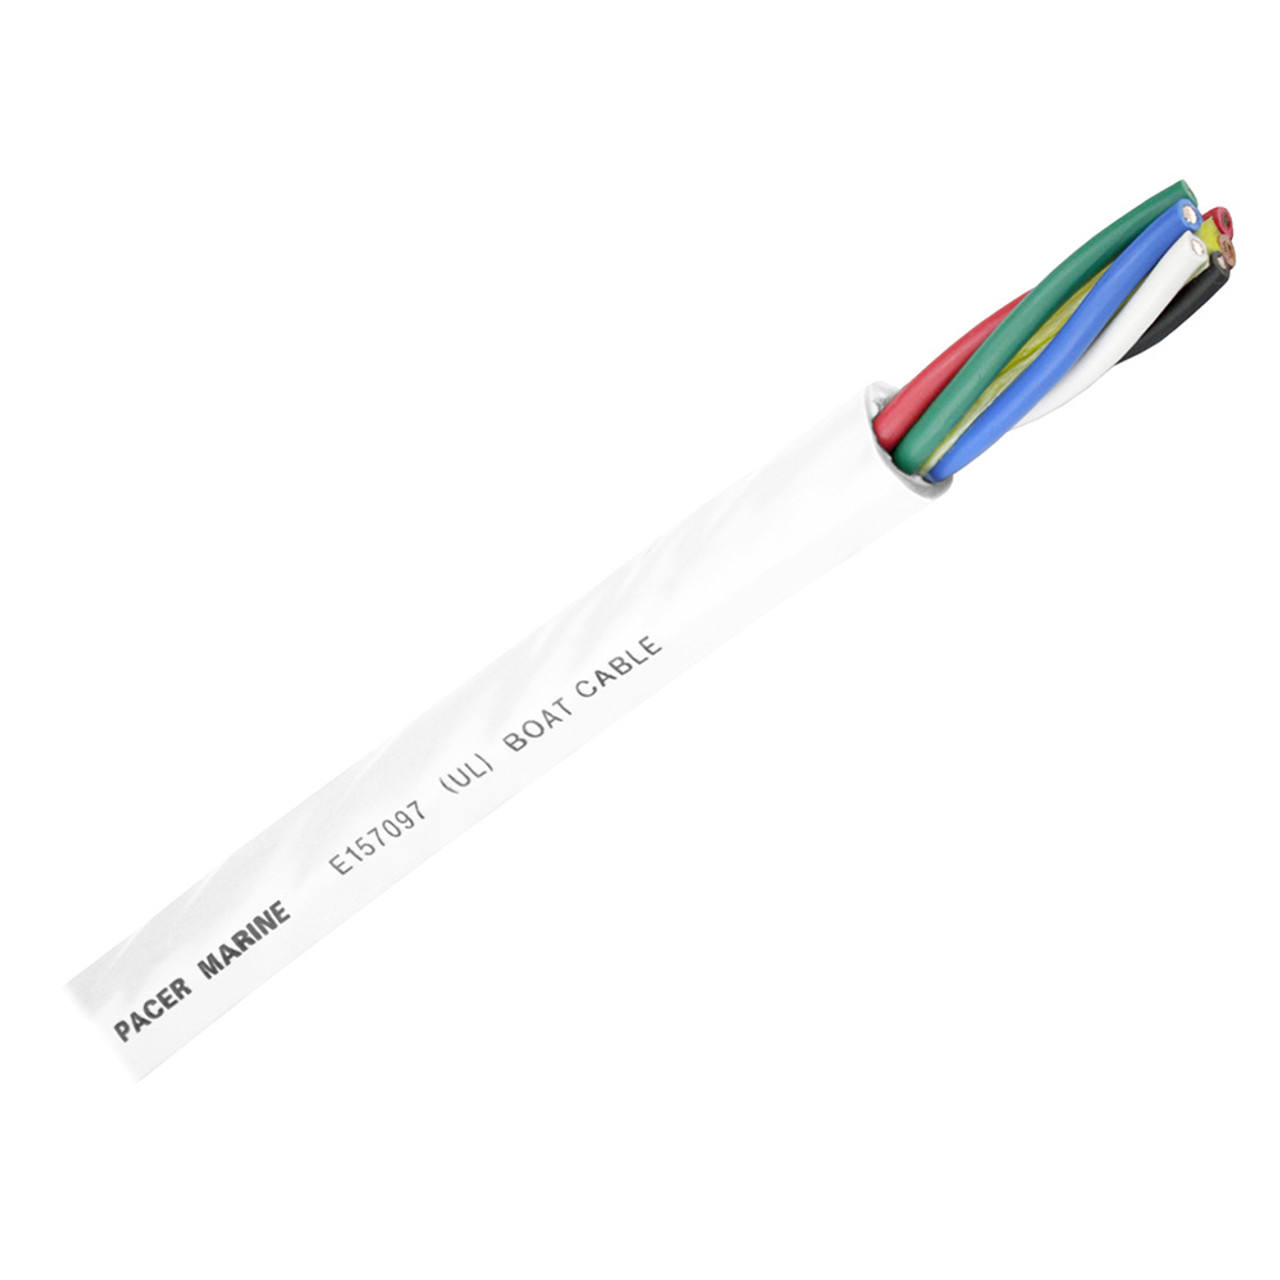 Pacer Round 6 Conductor Cable - 100 - 16\/6 AWG - Black, Brown, Red, Green, Blue  White [WR16\/6-100]